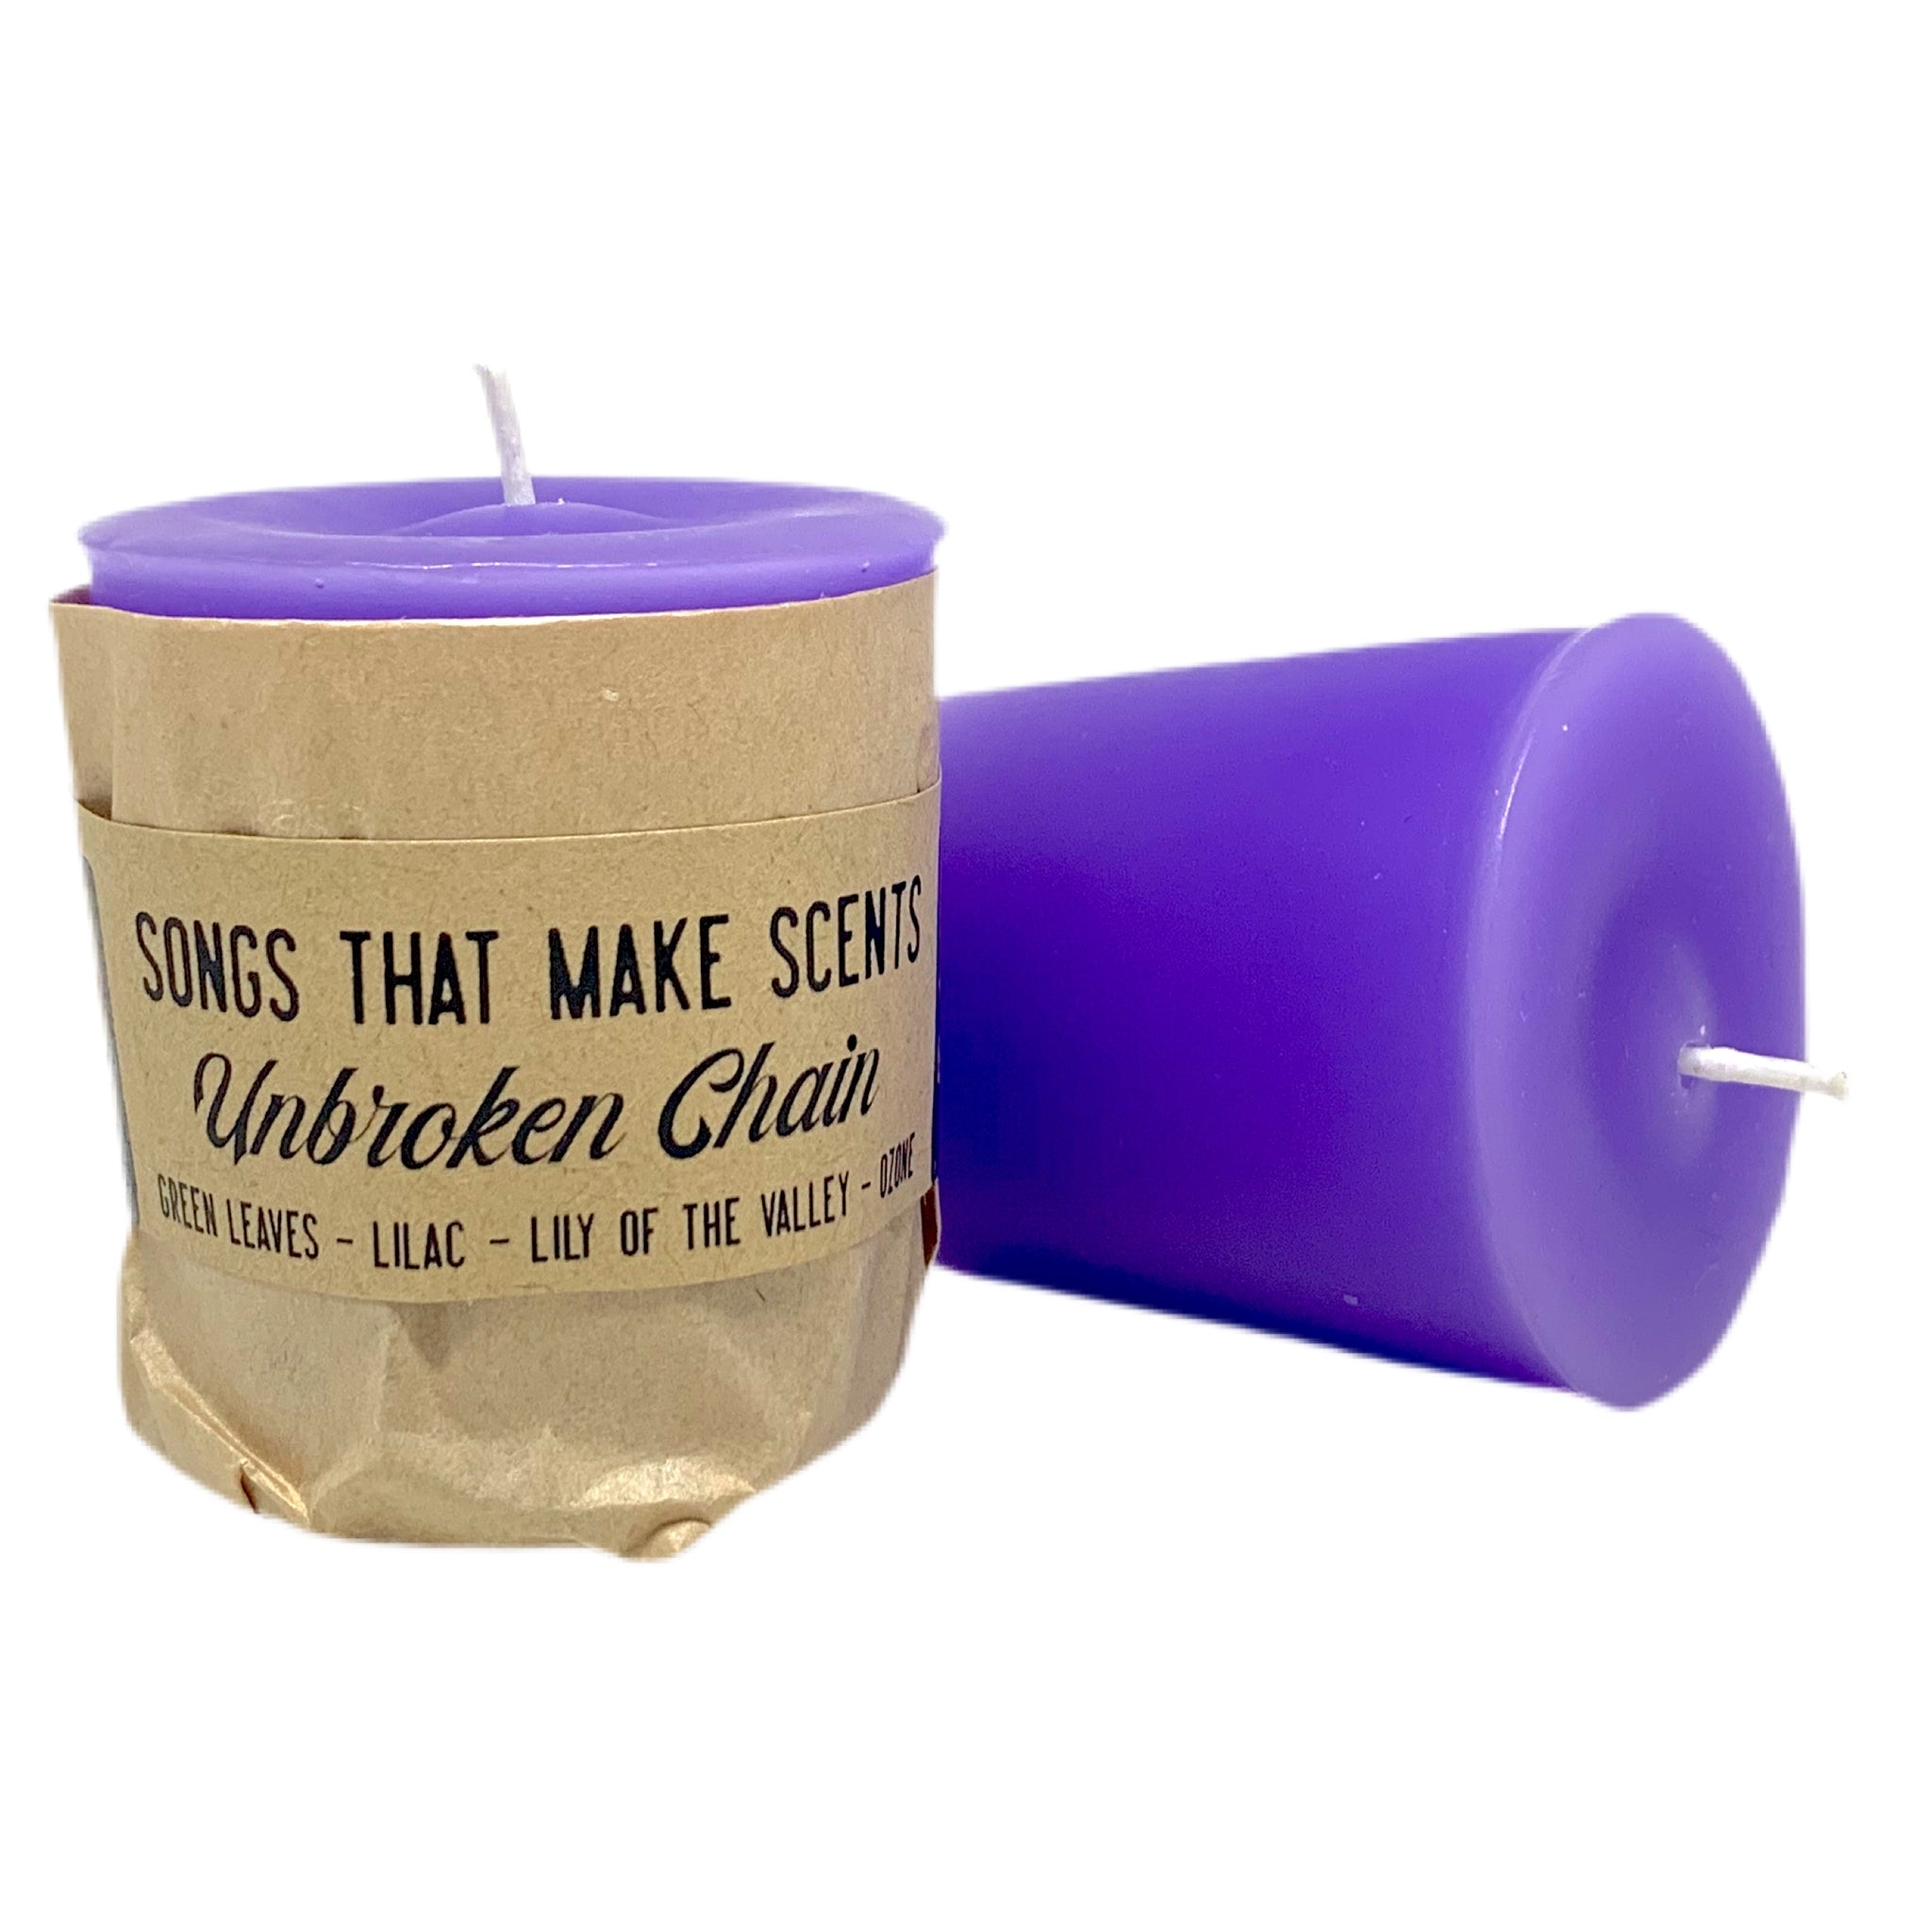 Unbroken Chain Scented Votive Candles by Songs That Make Scents